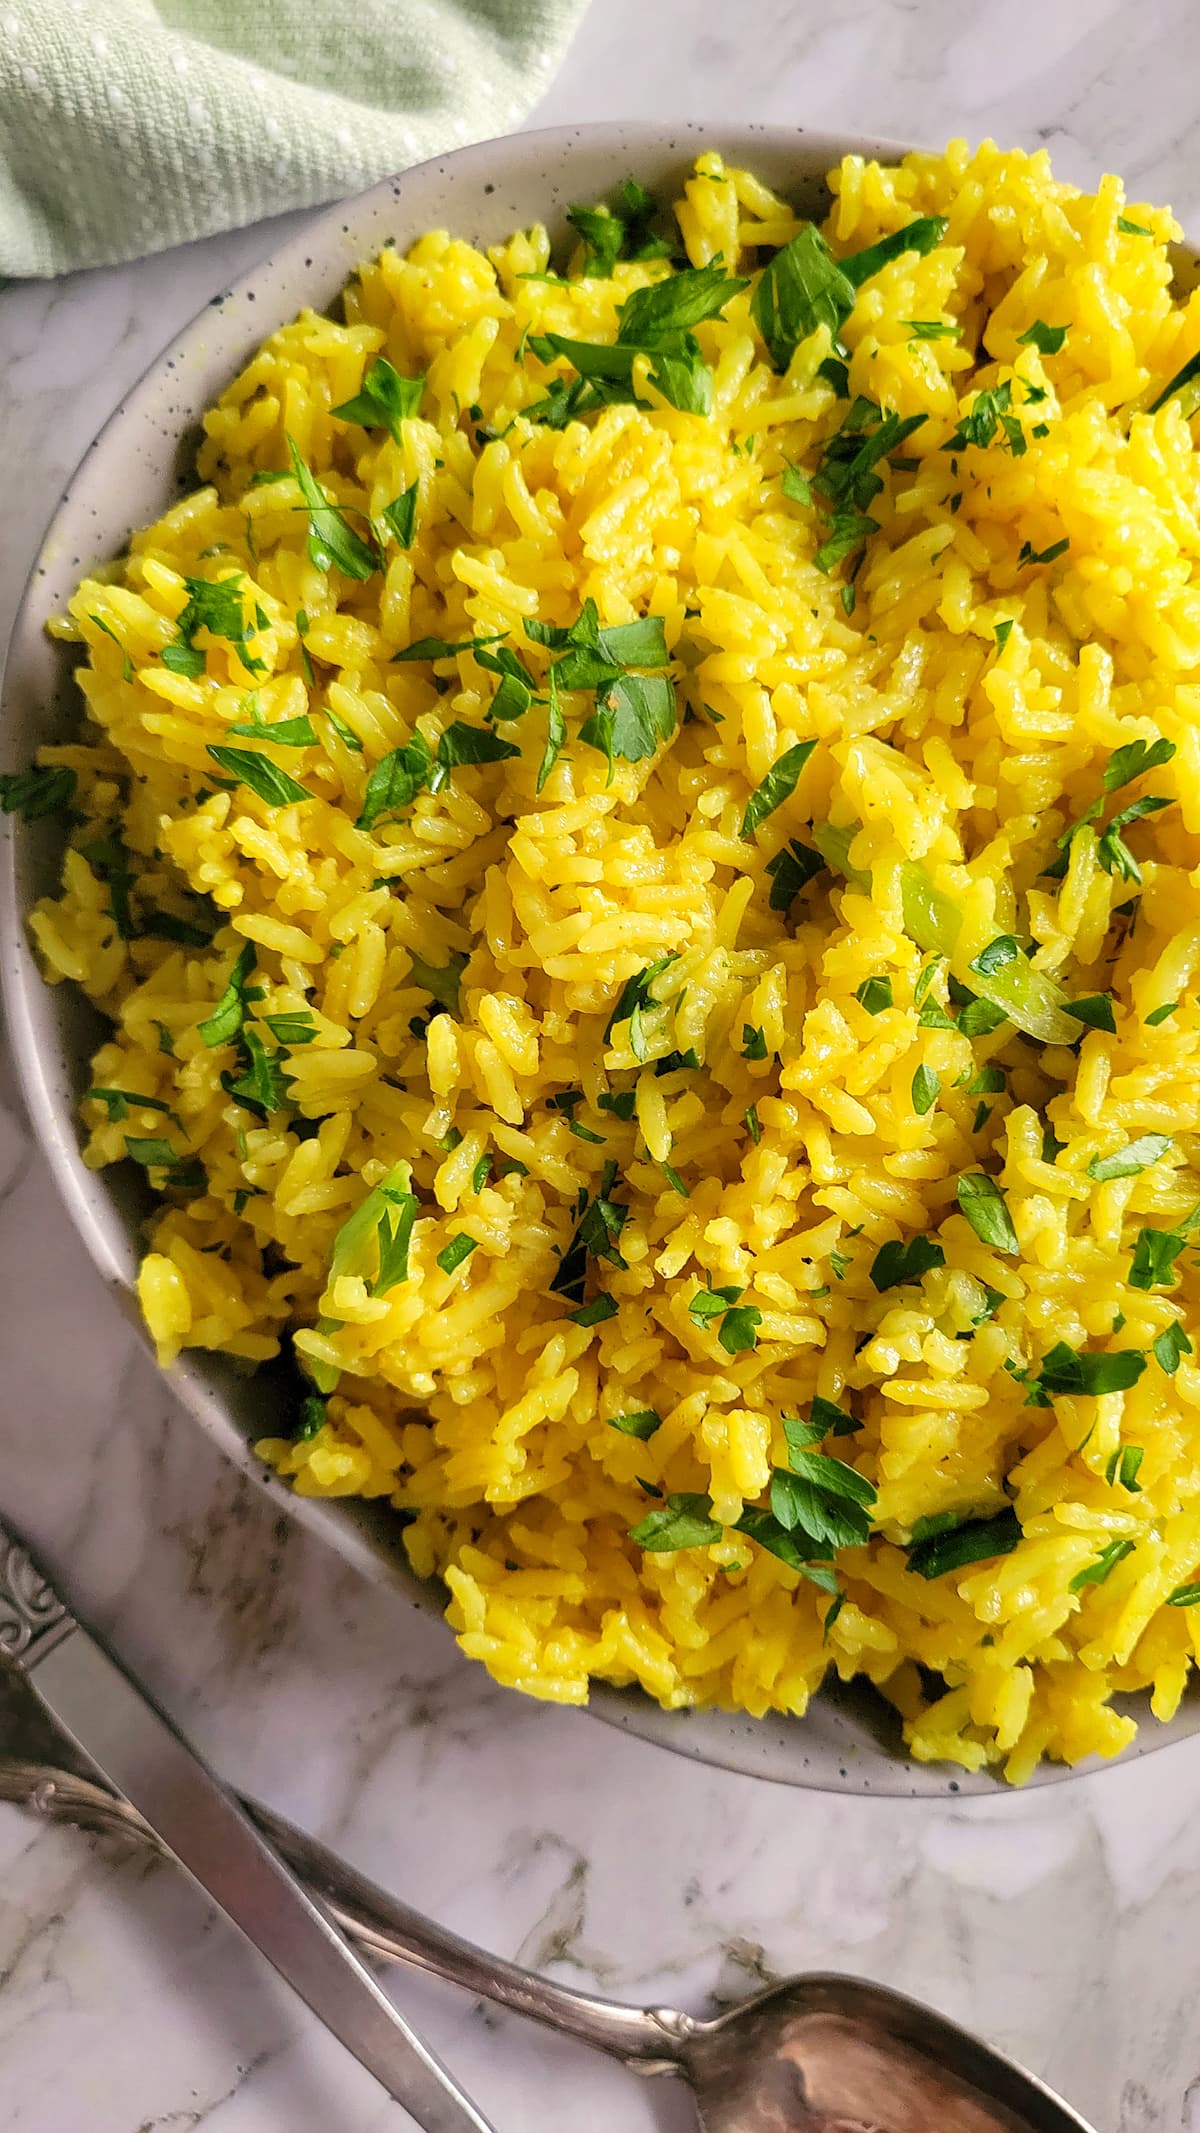 bowl of turmeric rice garnished with green onions and parsley